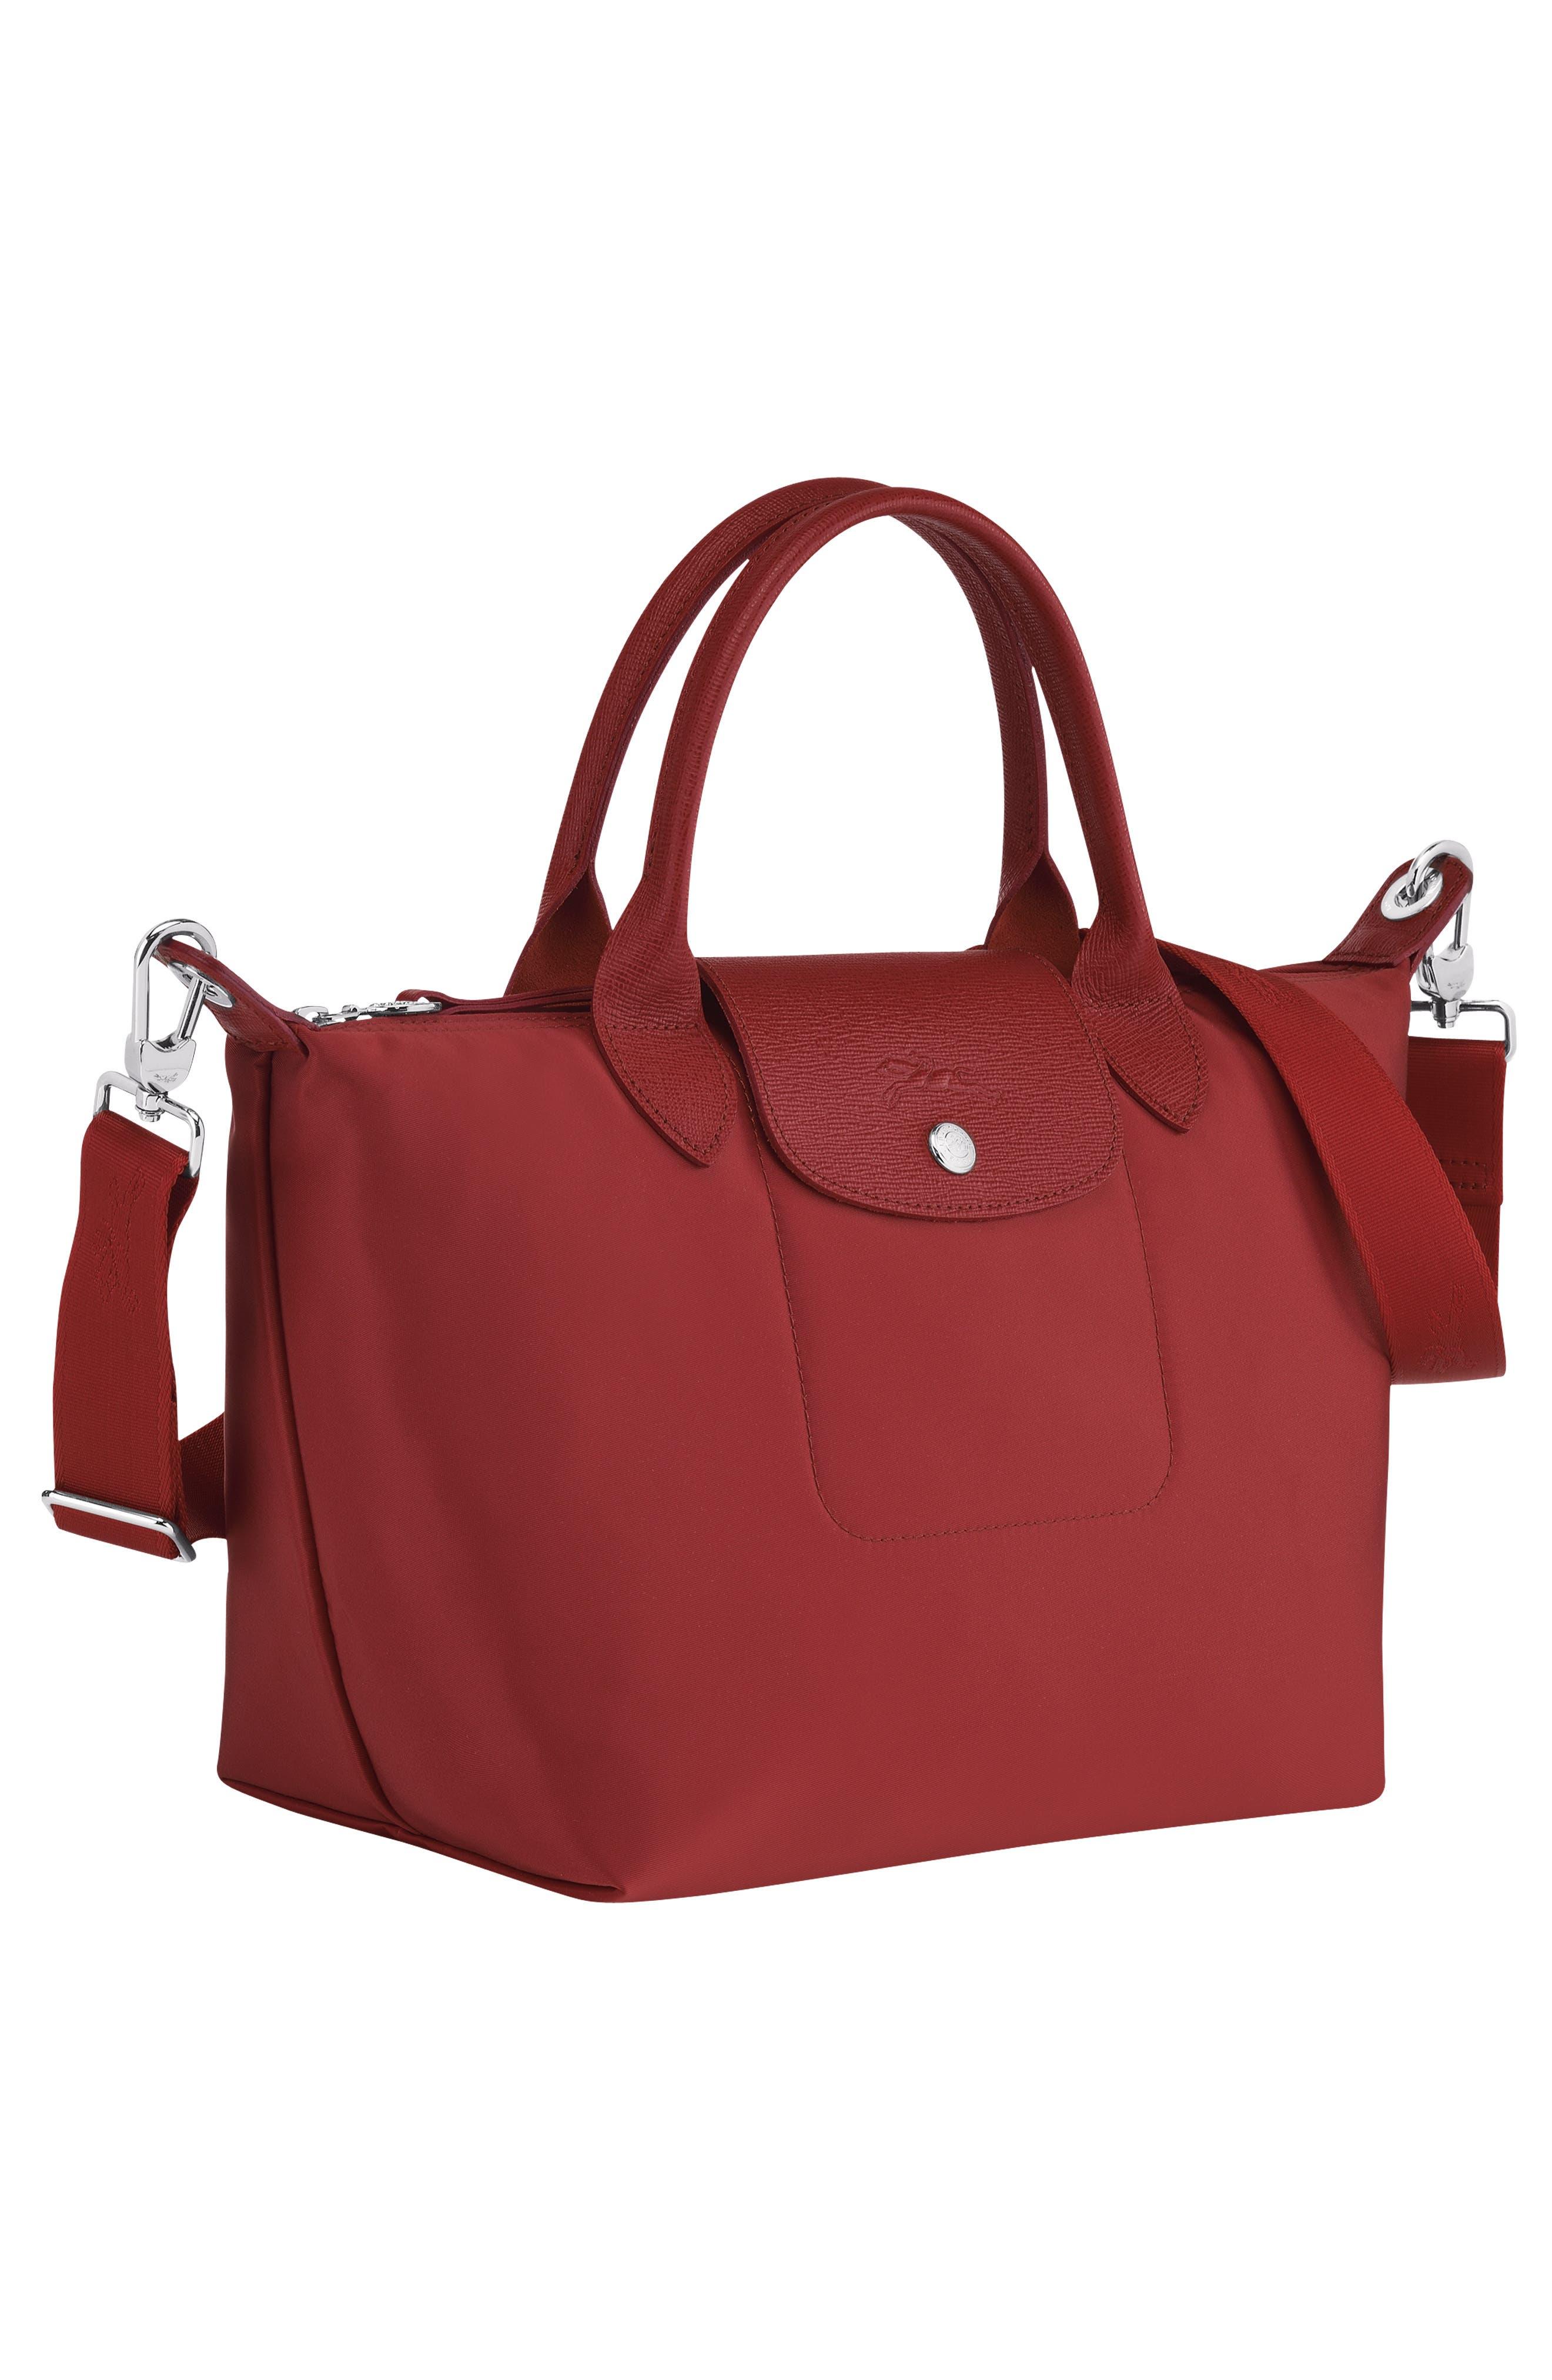 Longchamp Small Le Pliage Neo Nylon Top Handle Bag in Red | Lyst